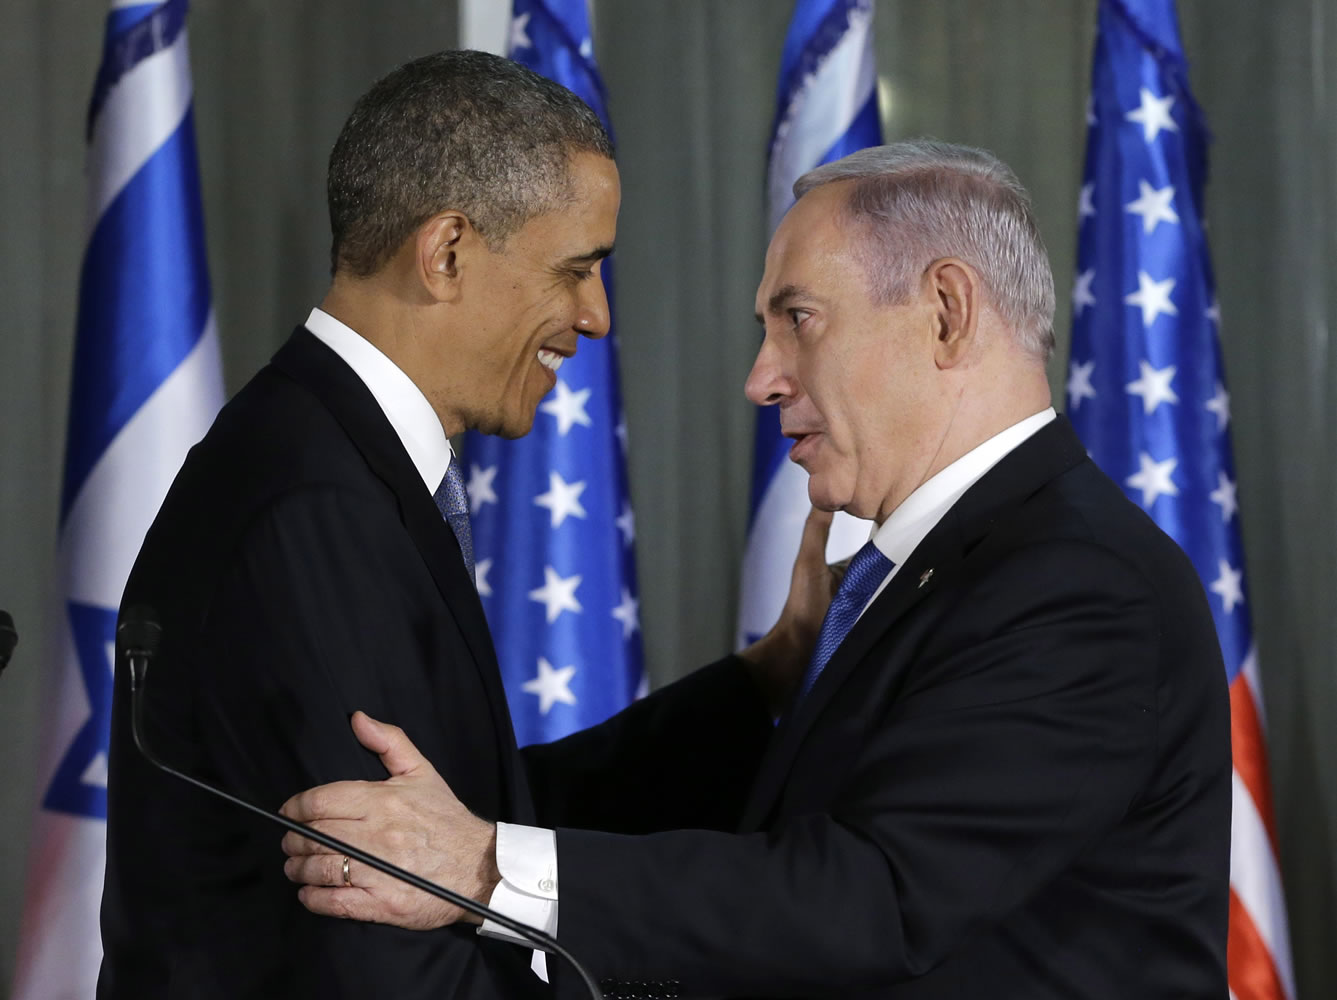 President Barack Obama and Israeli Prime Minister Benjamin Netanyahu shake hands as they participate in a joint news conference Wednesday at the prime minister's residence in Jerusalem.